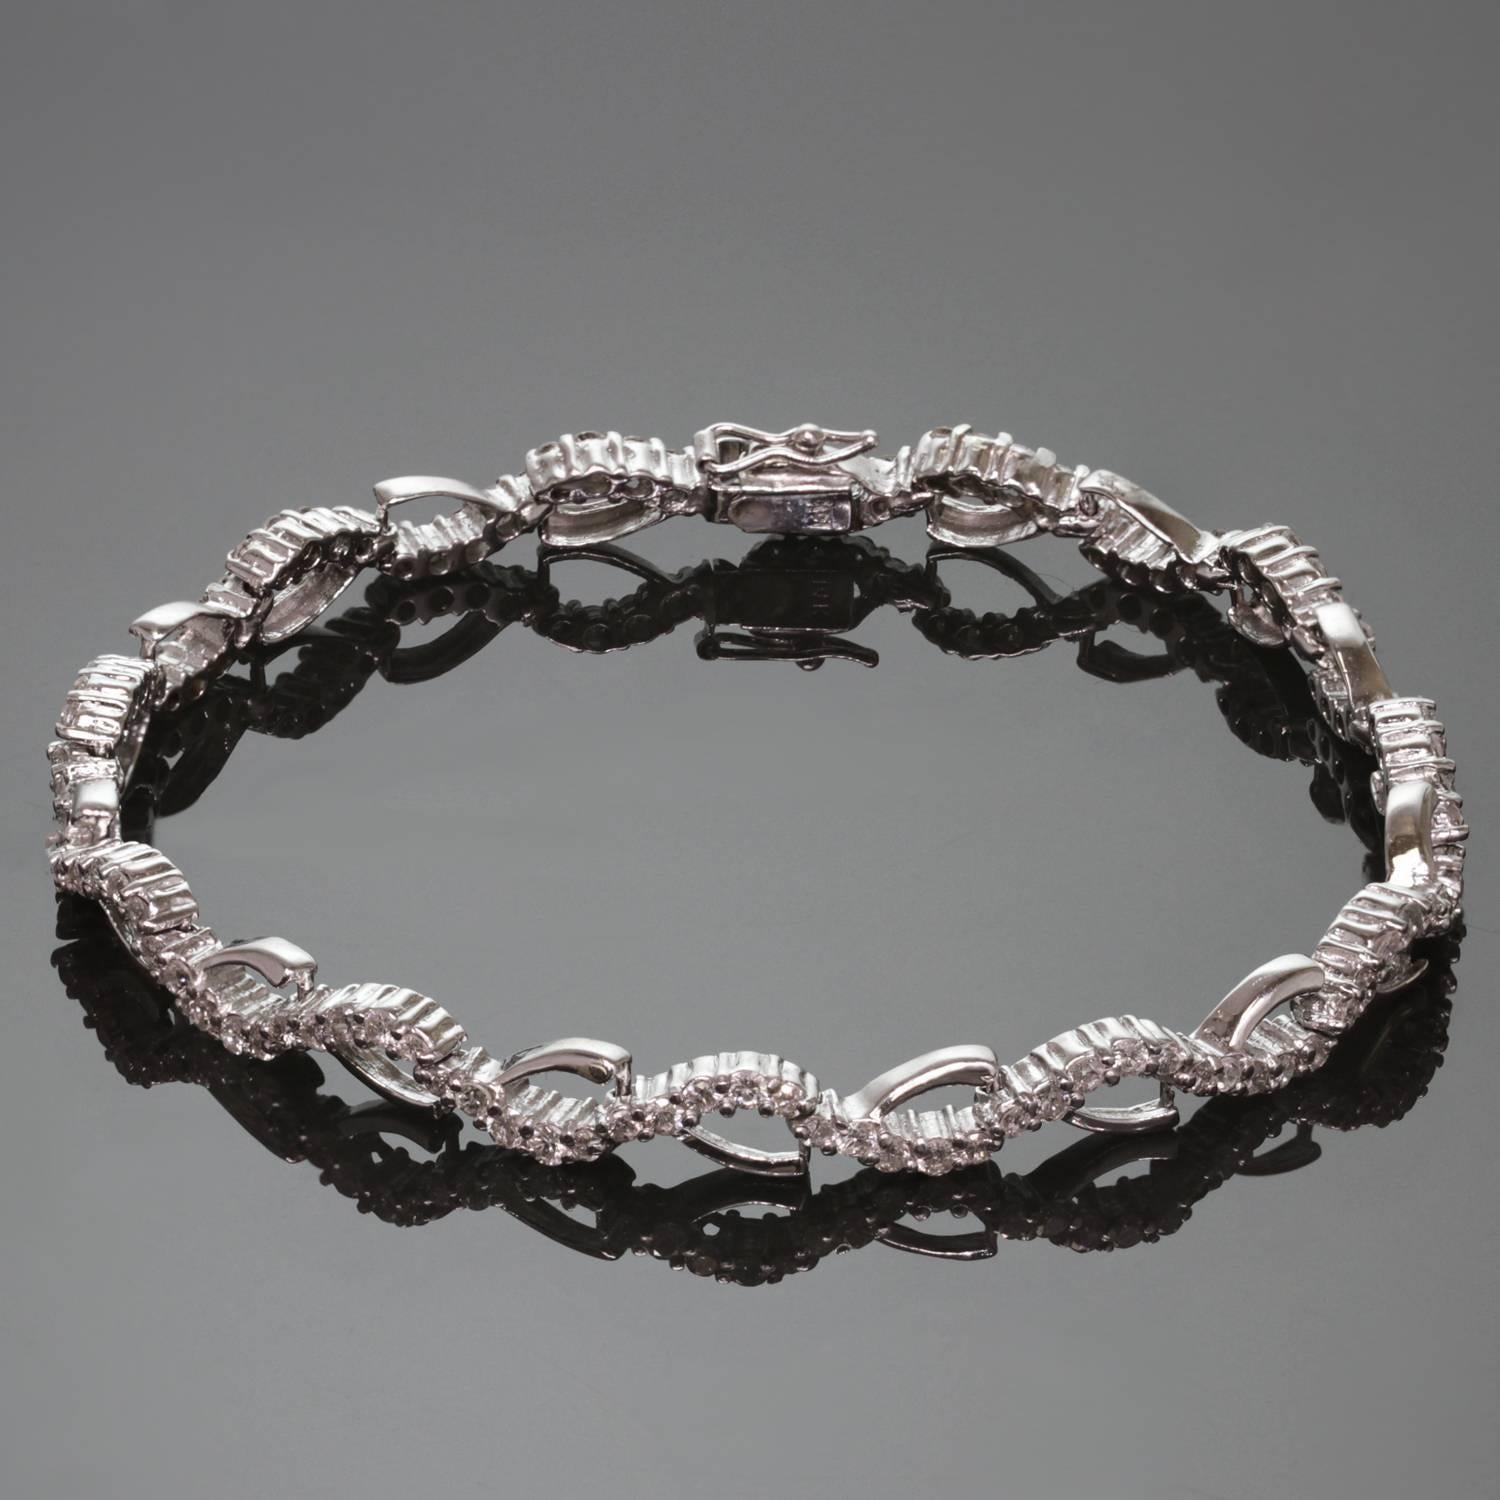 A classic modern tennis bracelet featuring 14k white gold wavy open links set with sparkling round brilliant-cut diamonds of an estimated 3.54 carats. A timeless design for everyday elegance. Measurements: 0.23